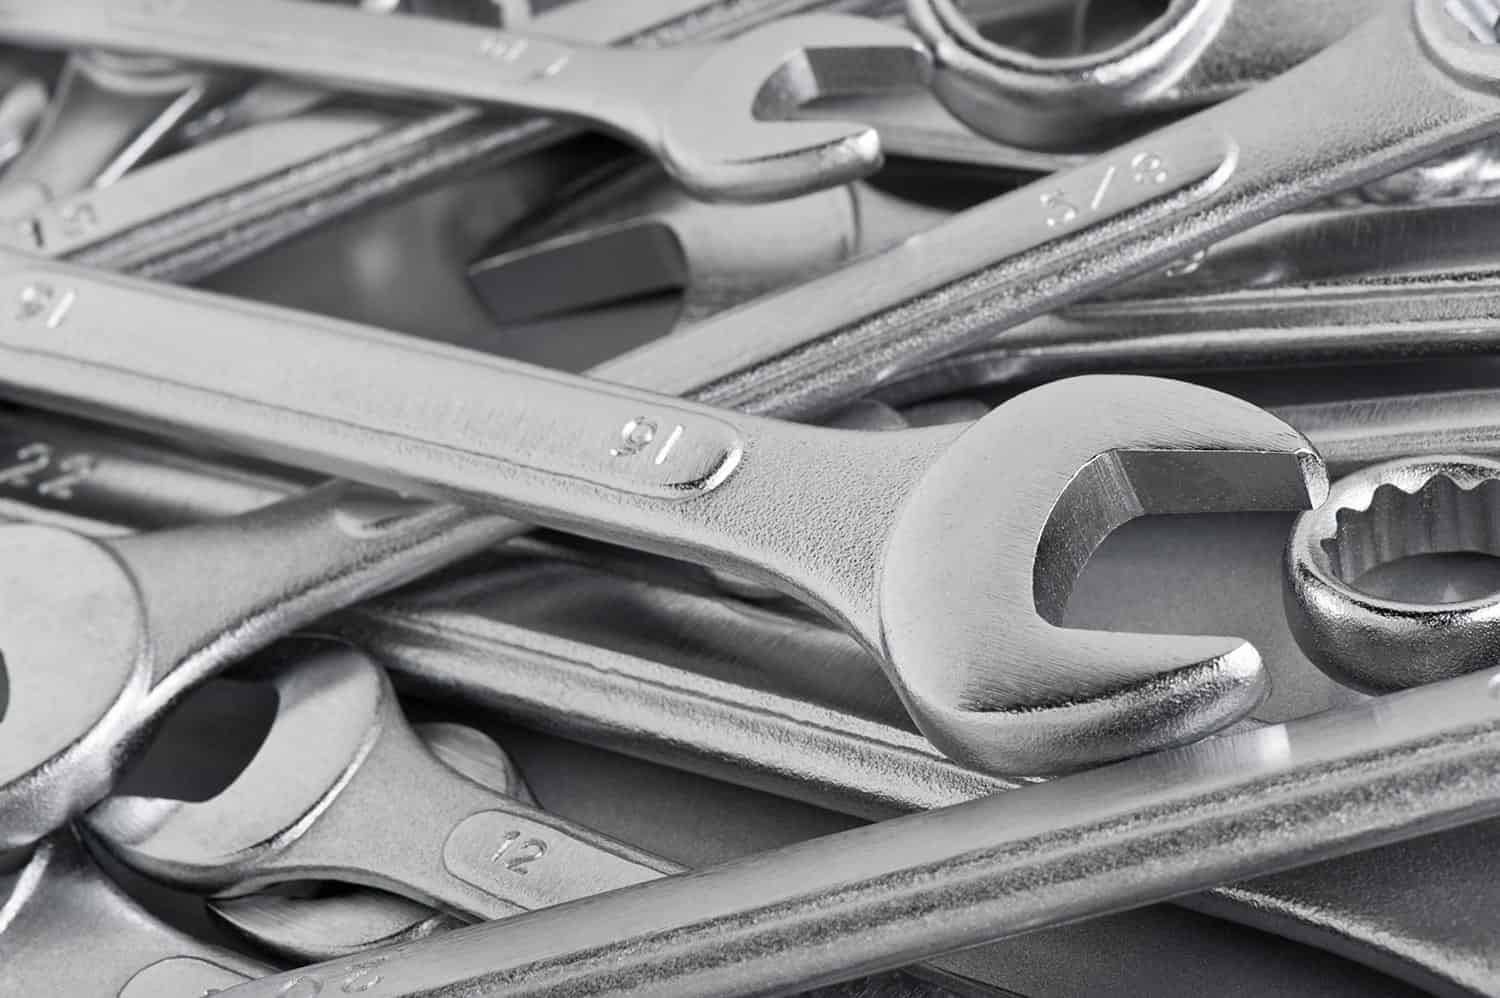 Mixed set of wrenches on a metallic grey table